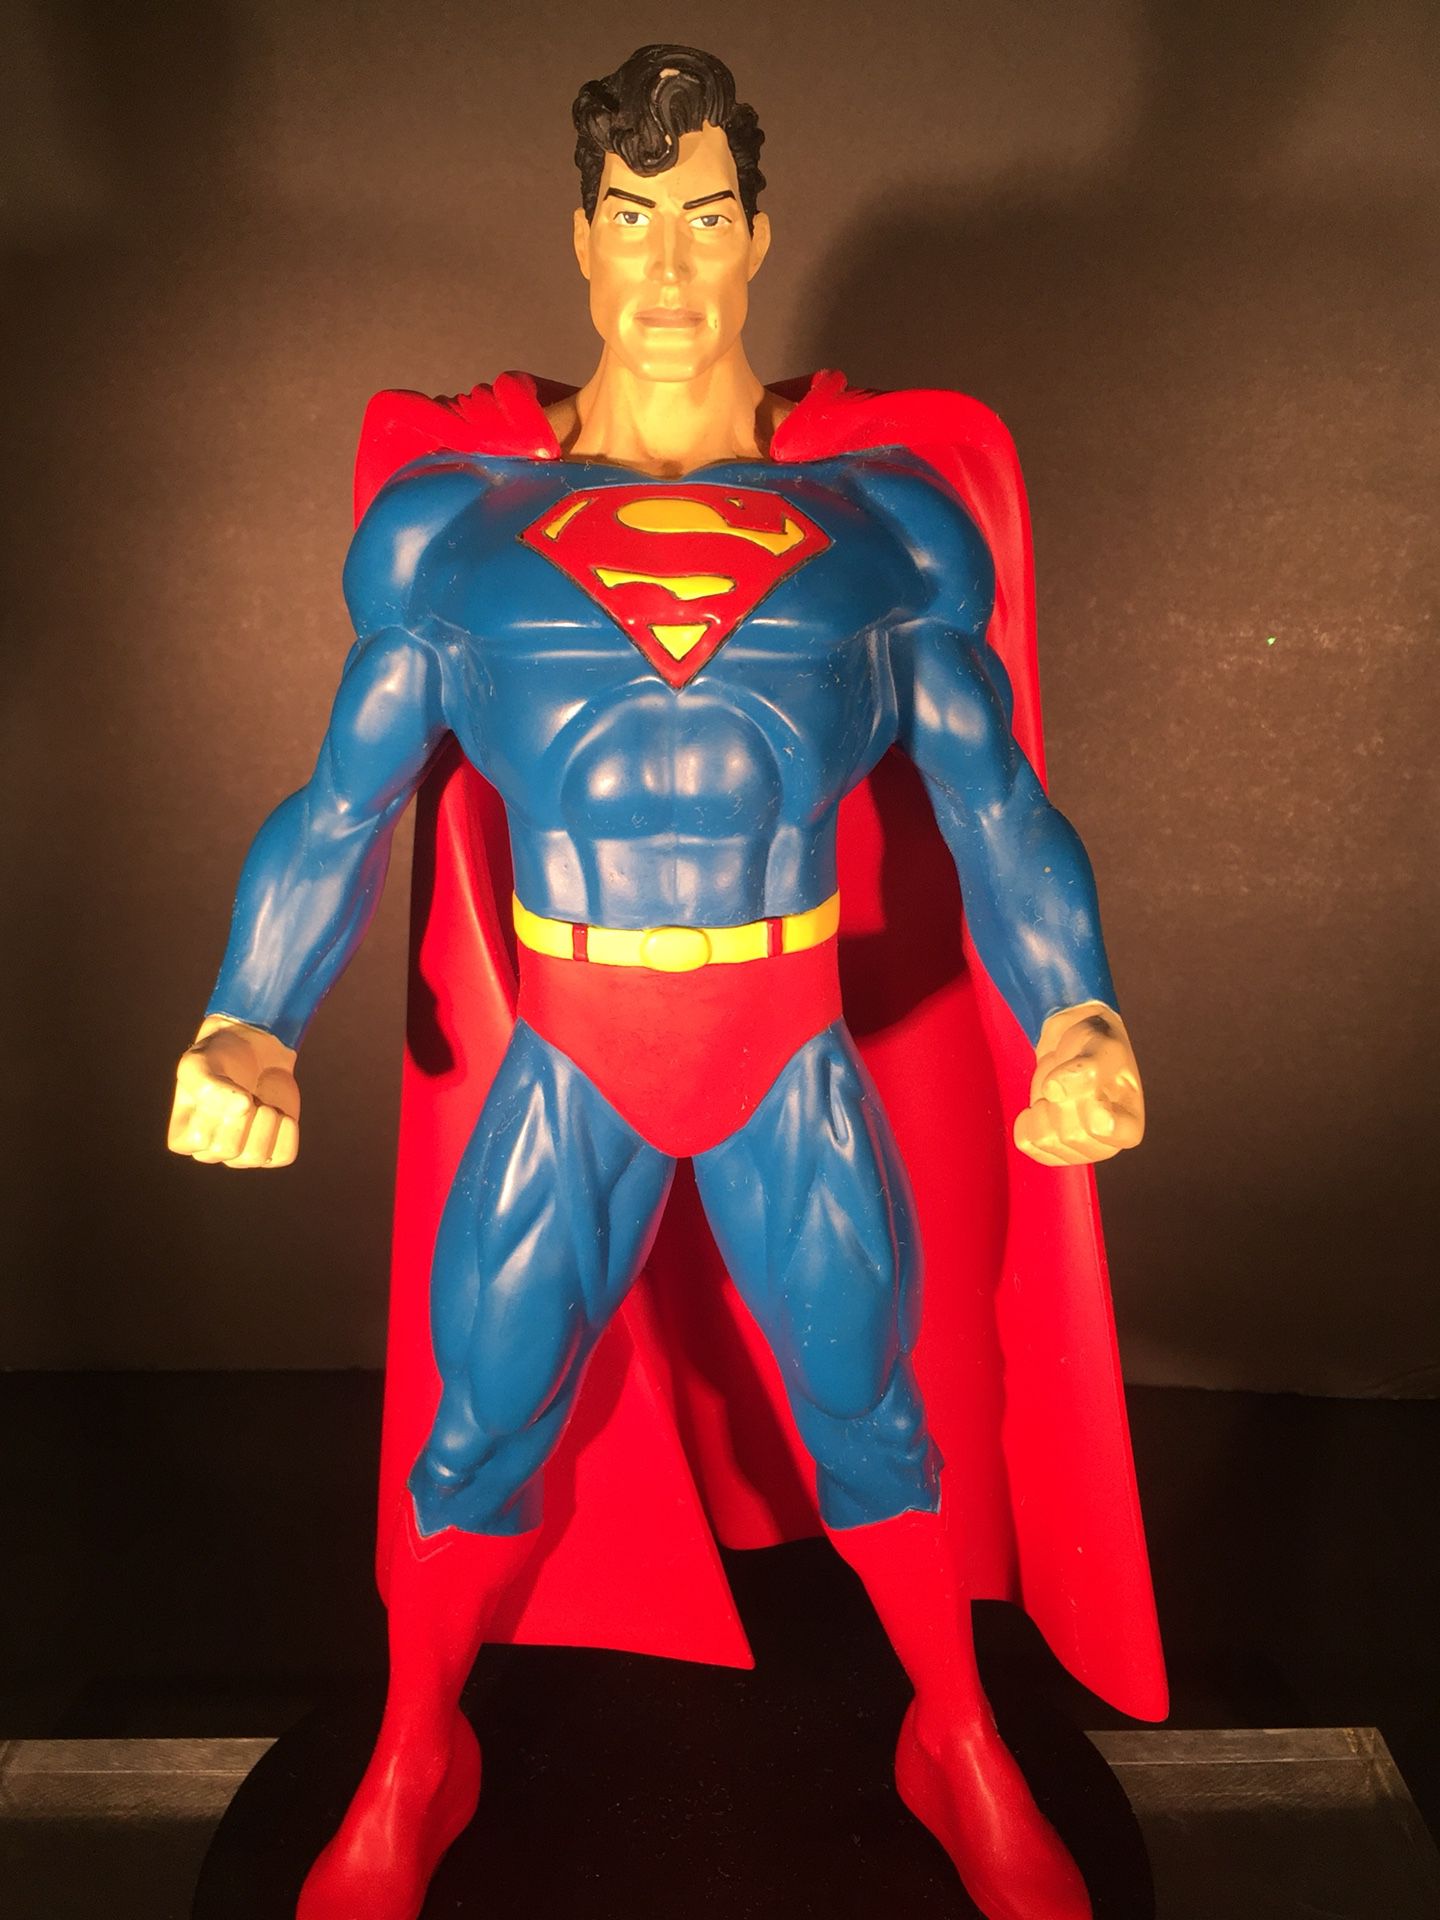 Superman 12" Statue. This is an Exclusive from the Warner Brothers Studio Store 1999